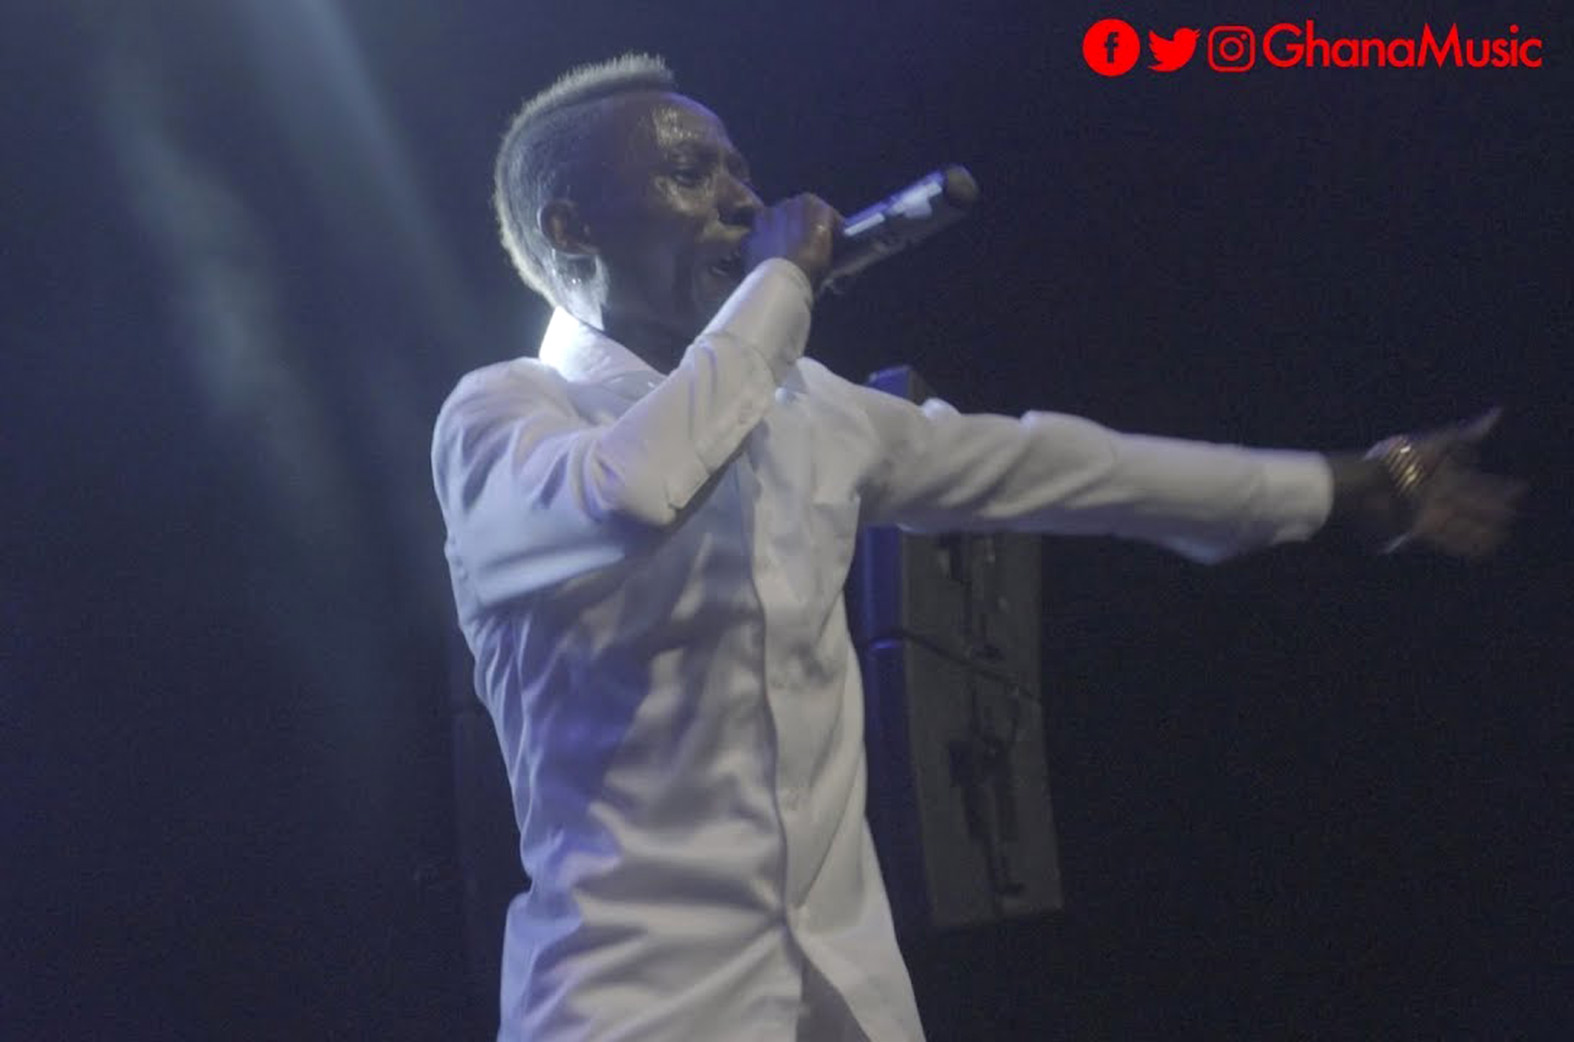 Patapaa stole the show at the VGMA 2018 celebration jam